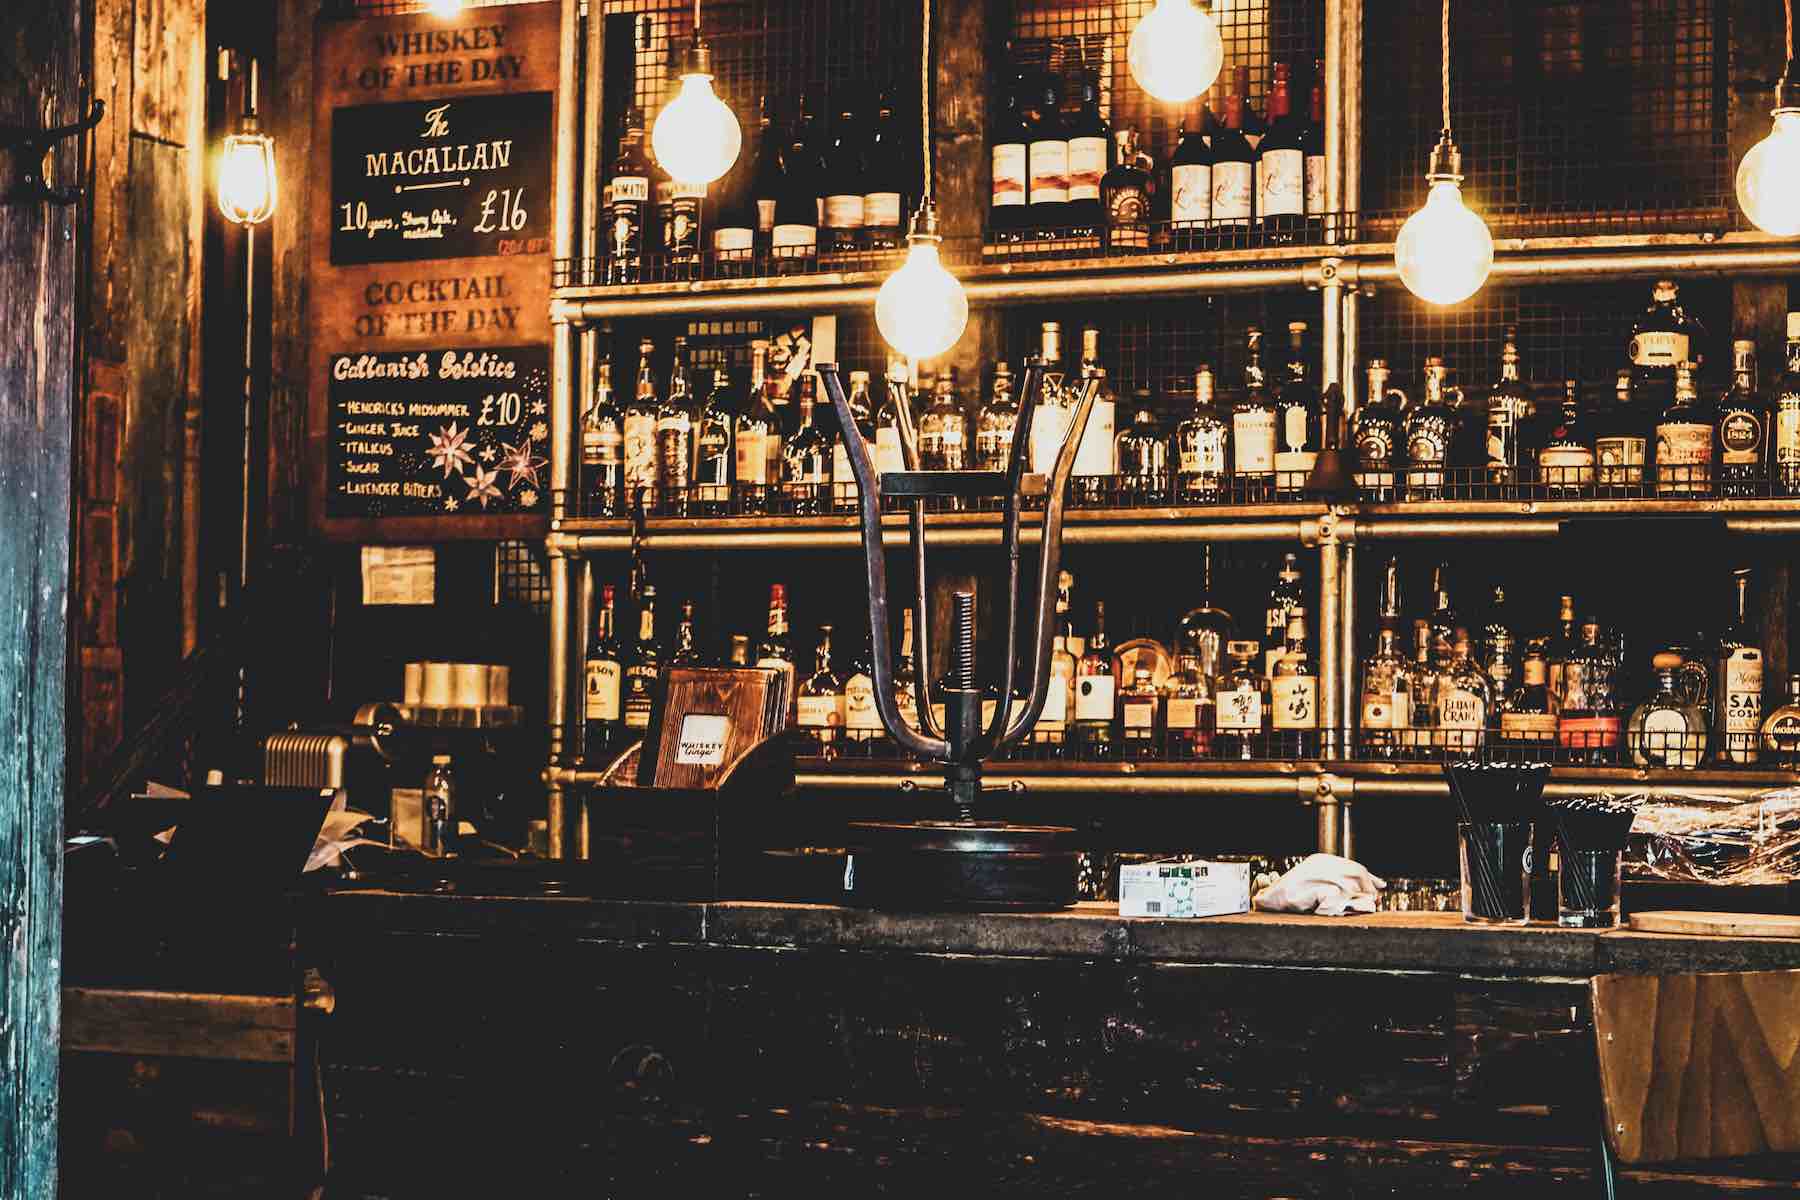 Top 10 Best Whisky Bars in the UK